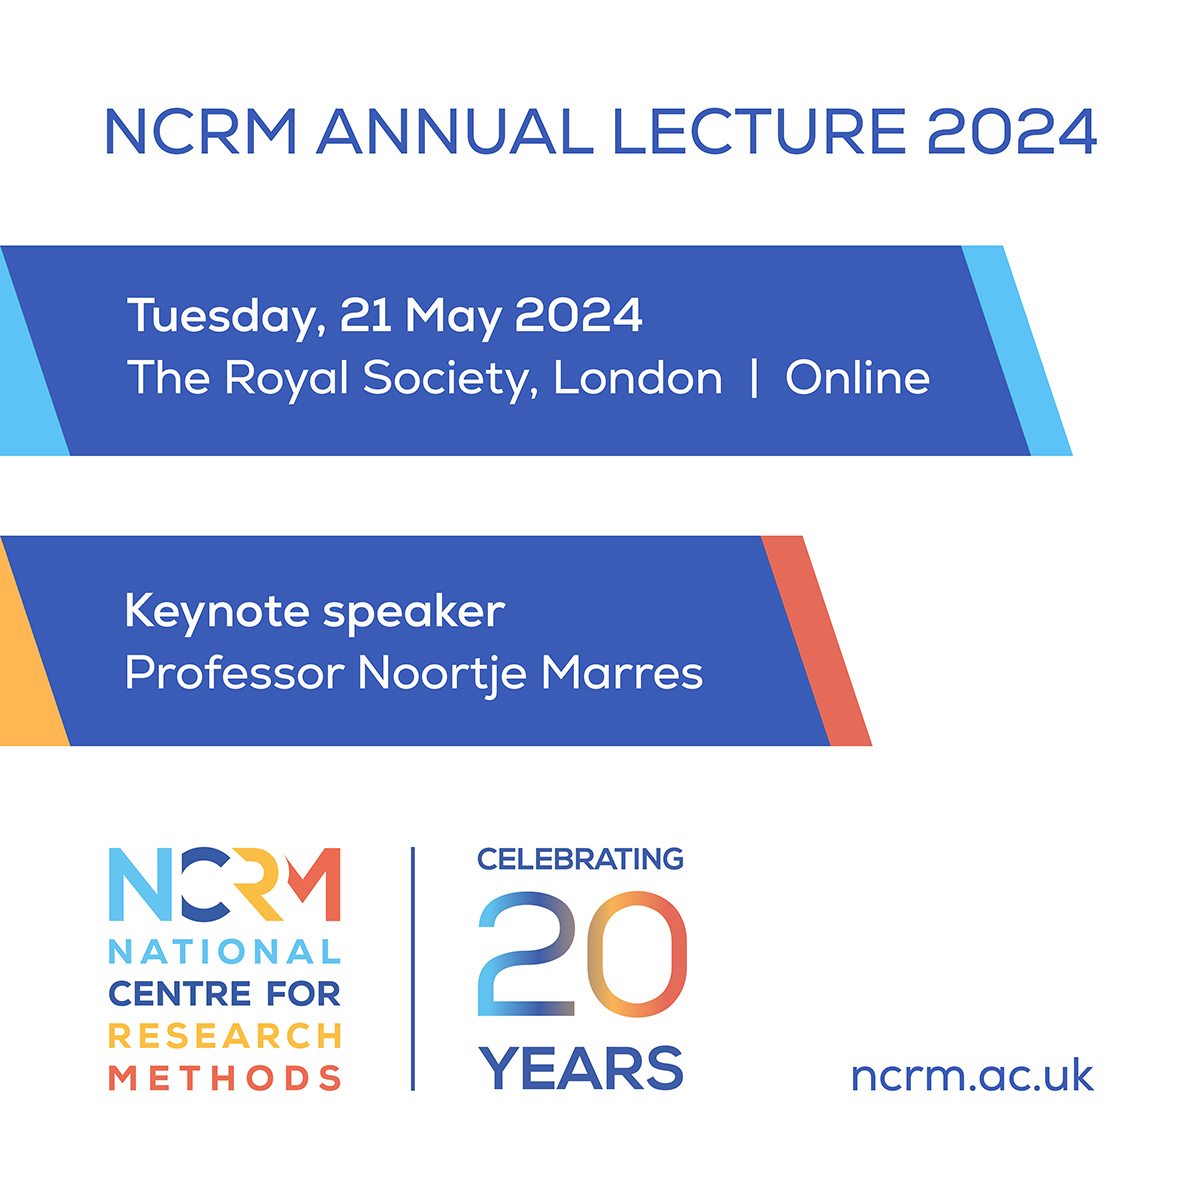 The NCRM Annual Lecture 2024 will explore the use of AI in social research. Join us on Tuesday, 21 May at the @royalsociety in London, with speaker @NoortjeMarres of @CIMethods. #NCRM24 is free to attend and will be streamed online. Book a place: ncrm.ac.uk/training/lectu…